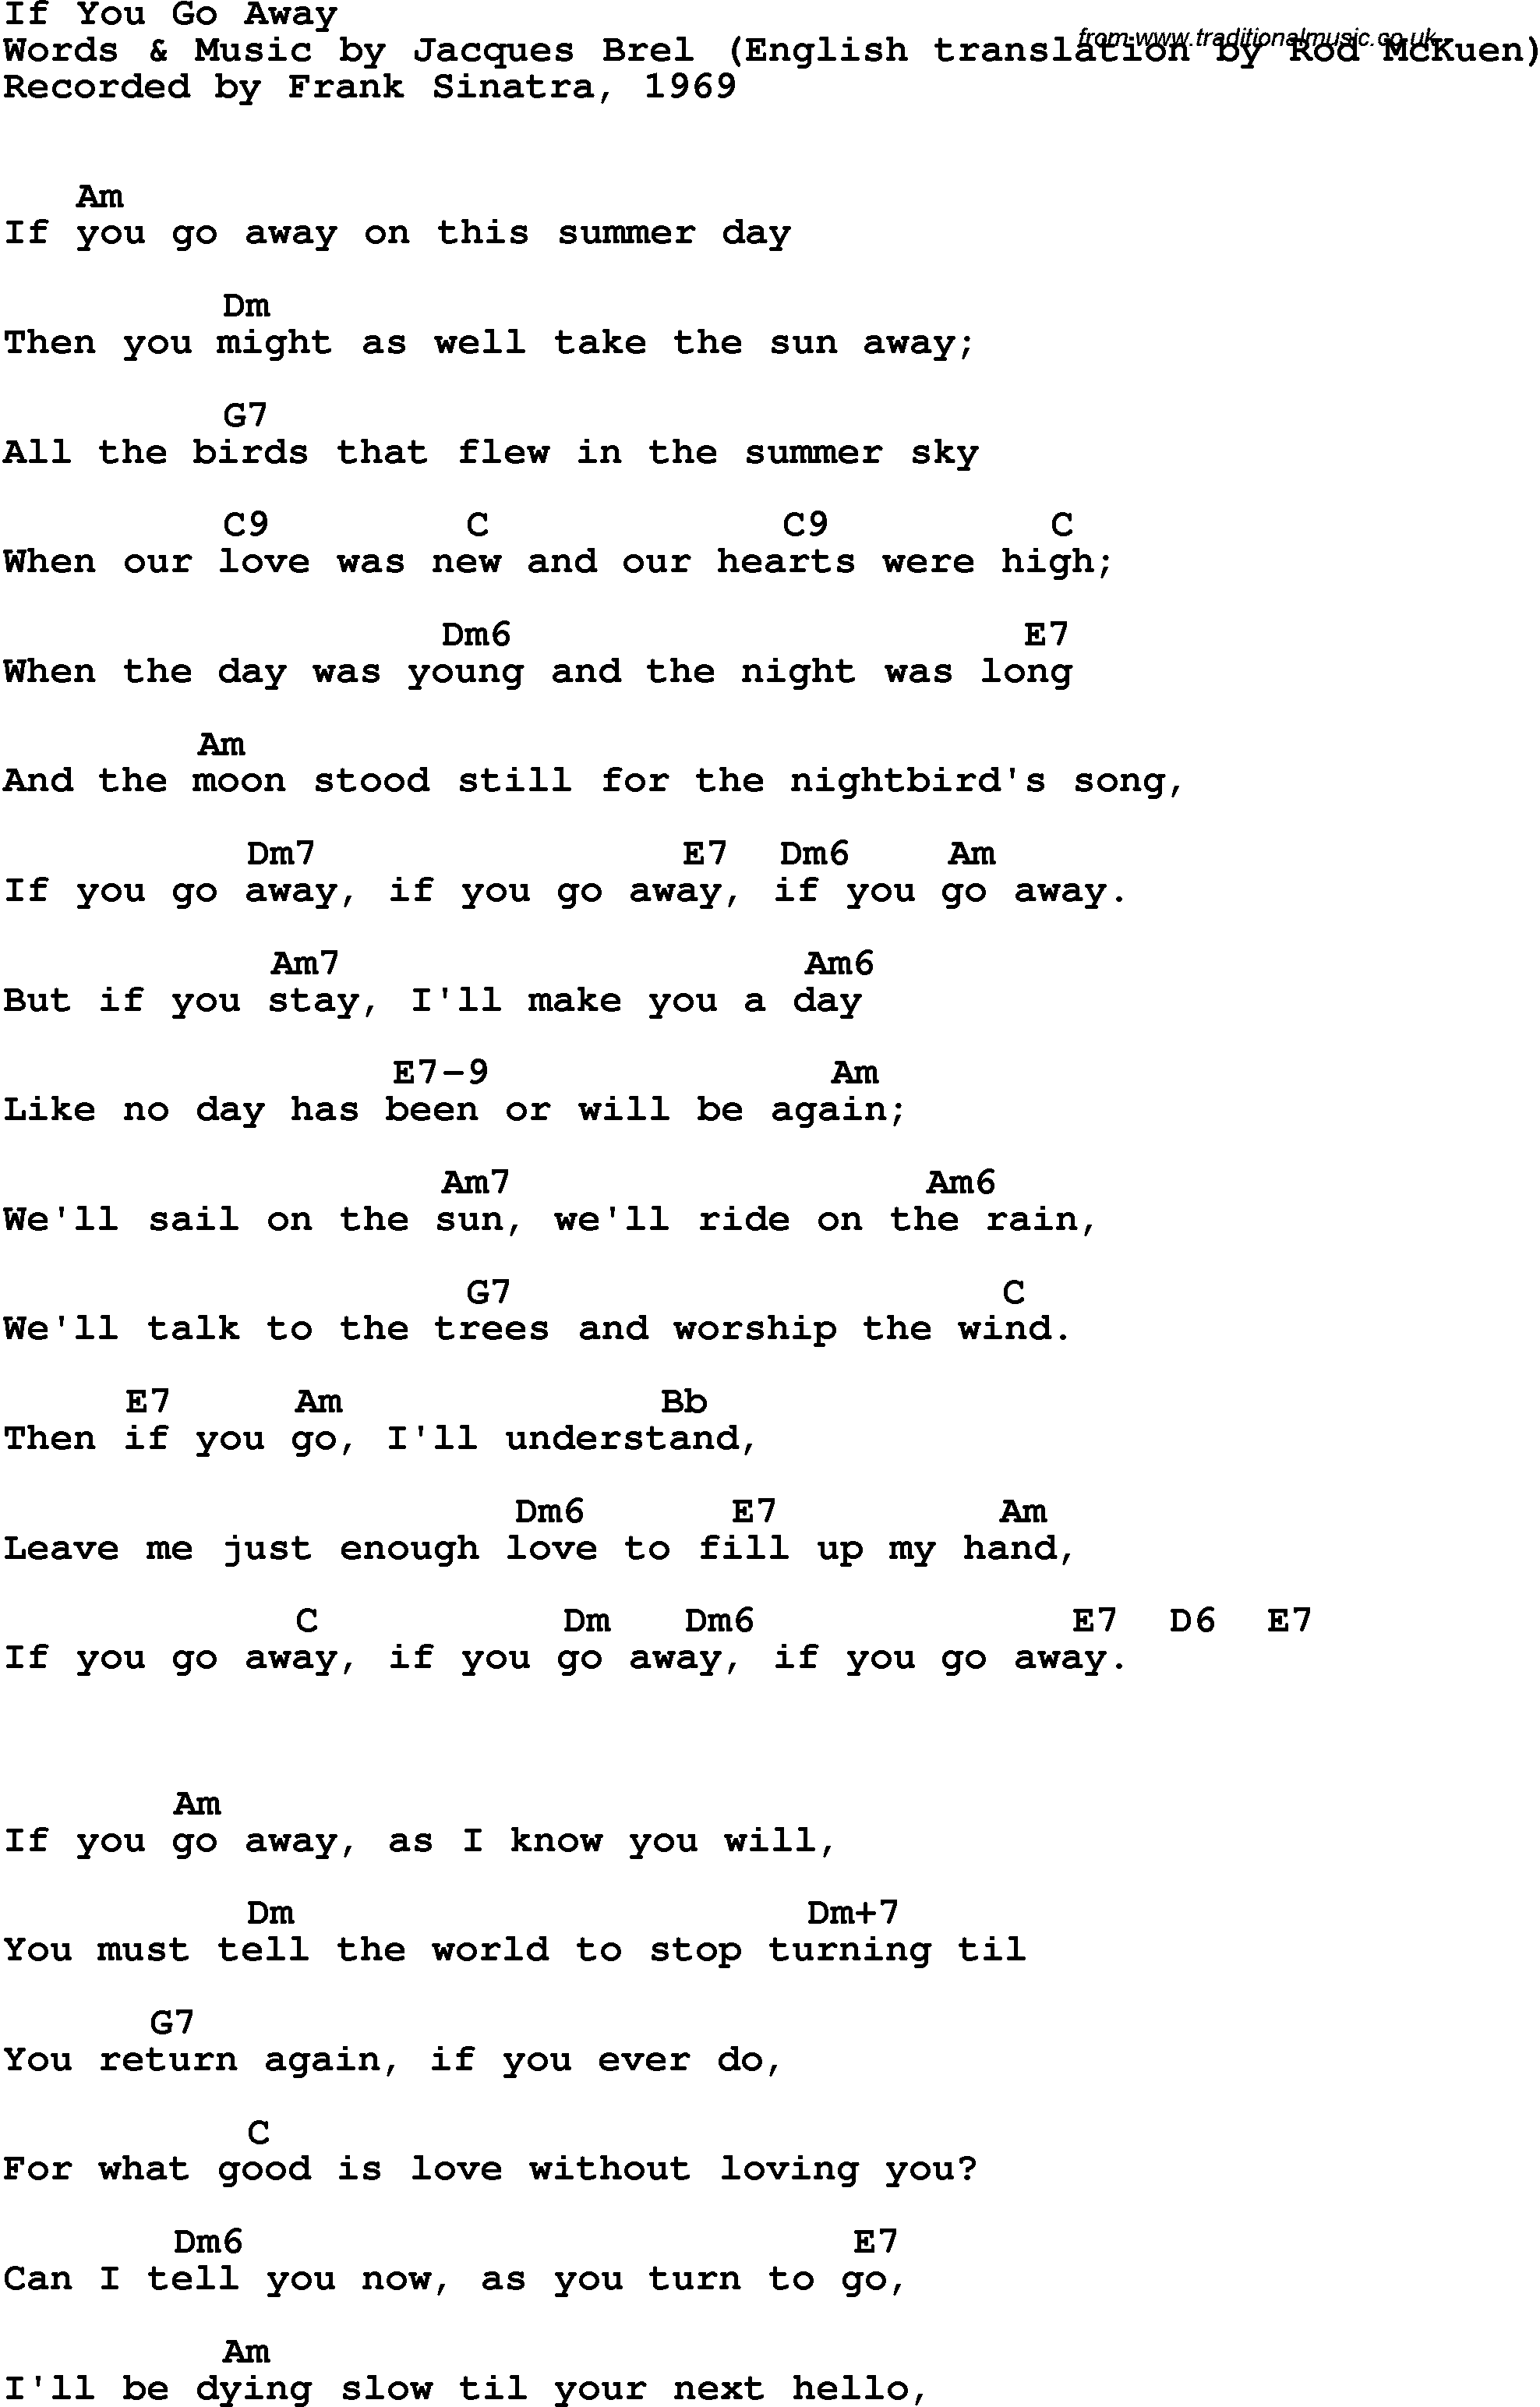 Song Lyrics with guitar chords for If You Go Away - Frank Sinatra, 1969